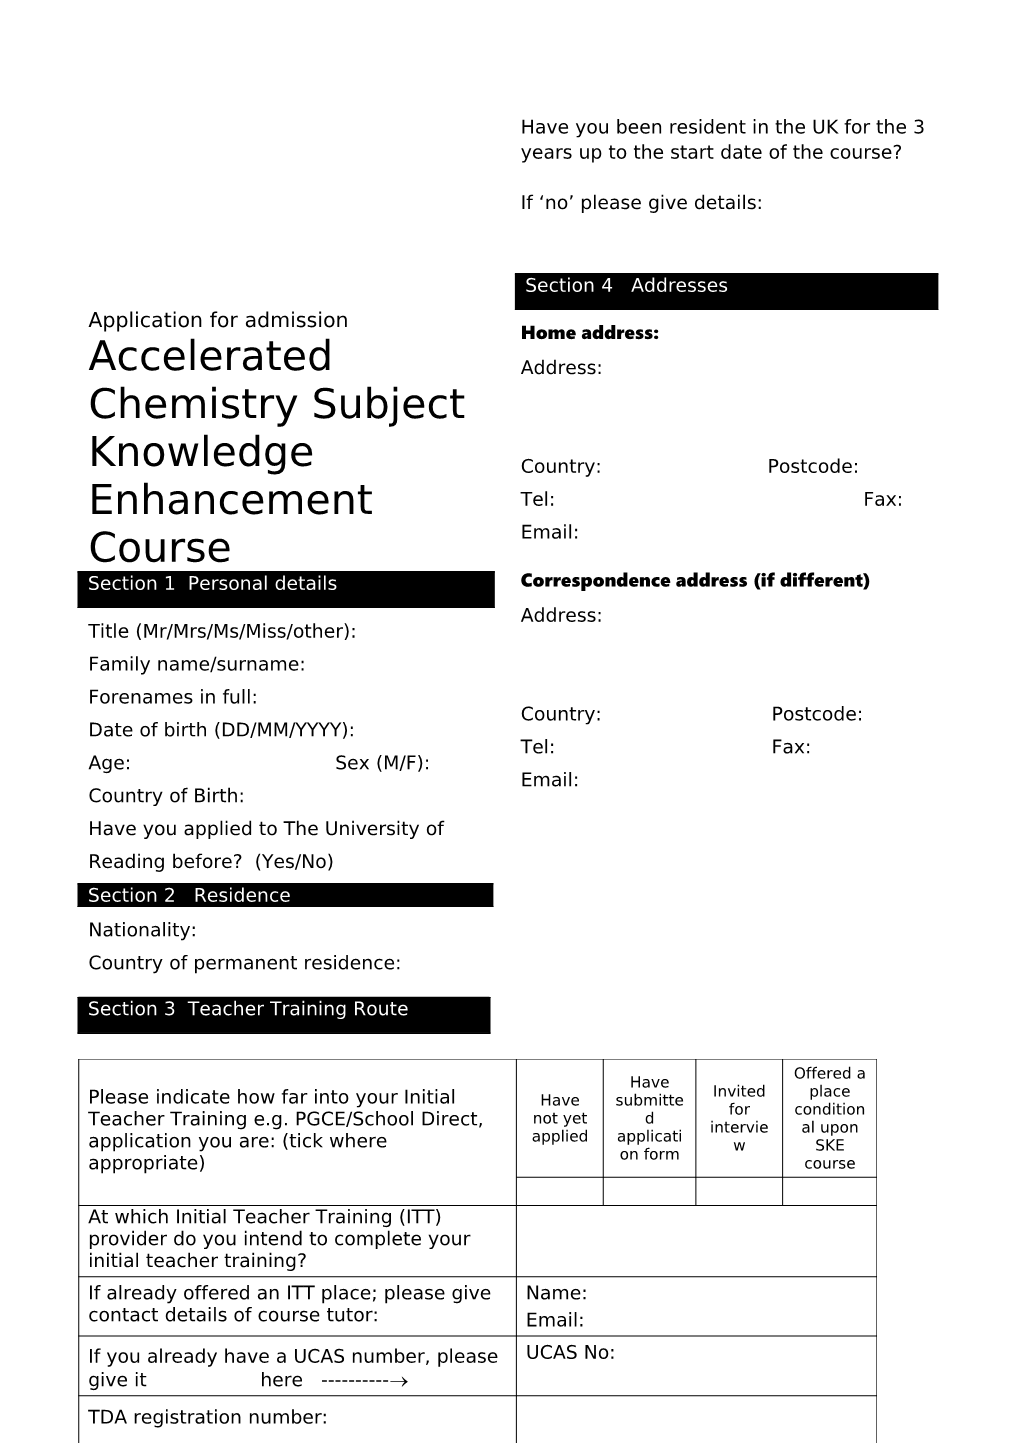 Application for Admission to the Chemistry Accelerated Subject Knowledge Enhancement Course